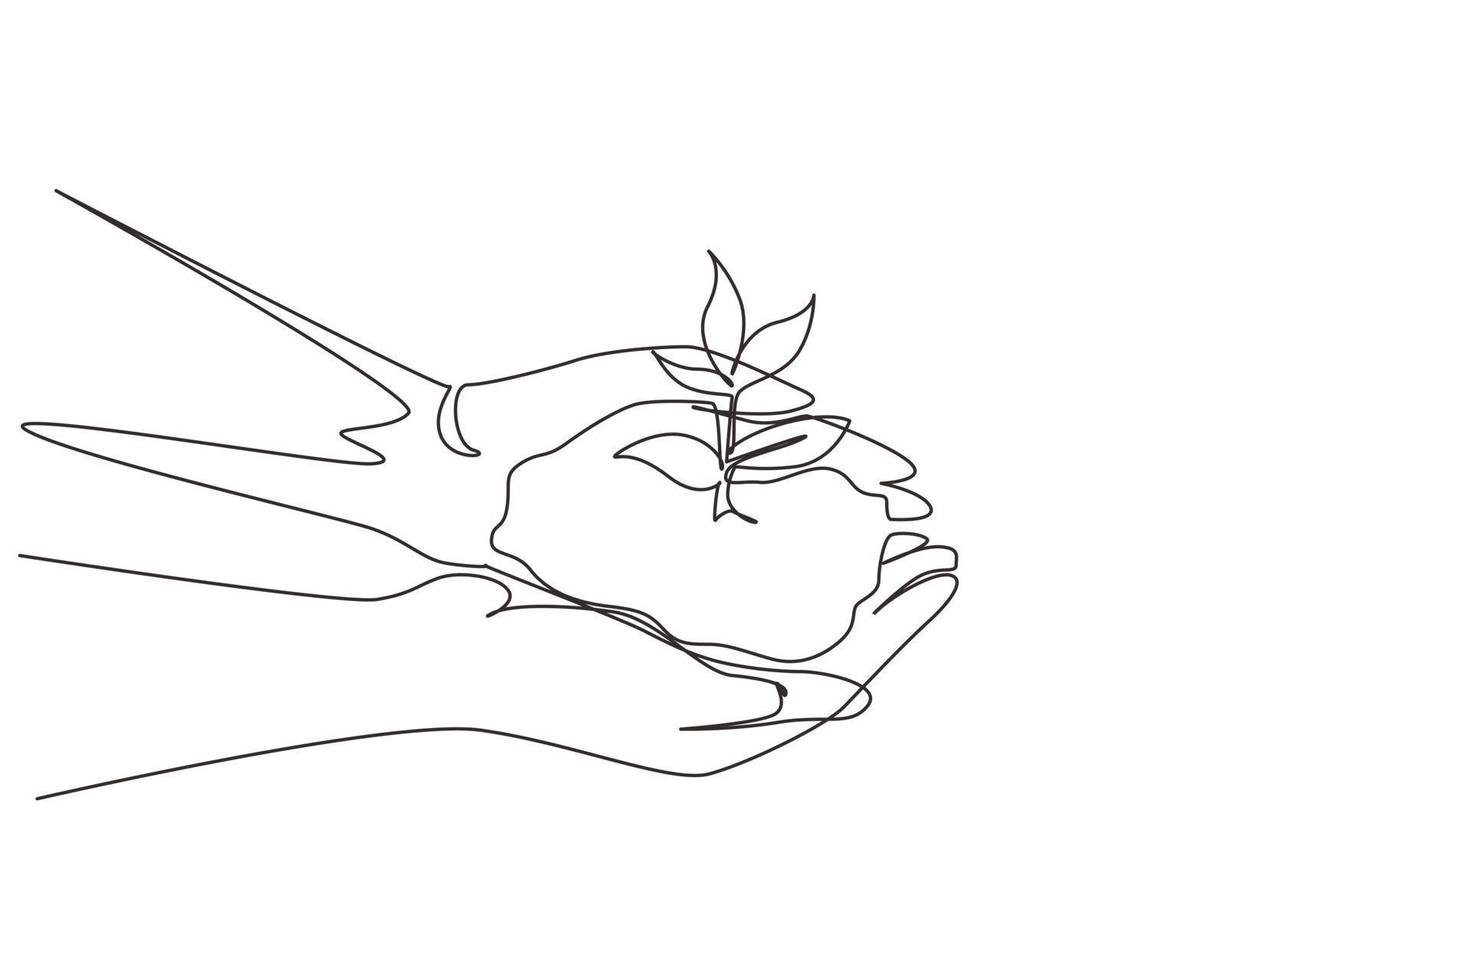 Single continuous line drawing hand holding sprout wilde pine tree in nature green forest. Earth Day save environment concept. Growing seedling forester planting. One line draw graphic design vector